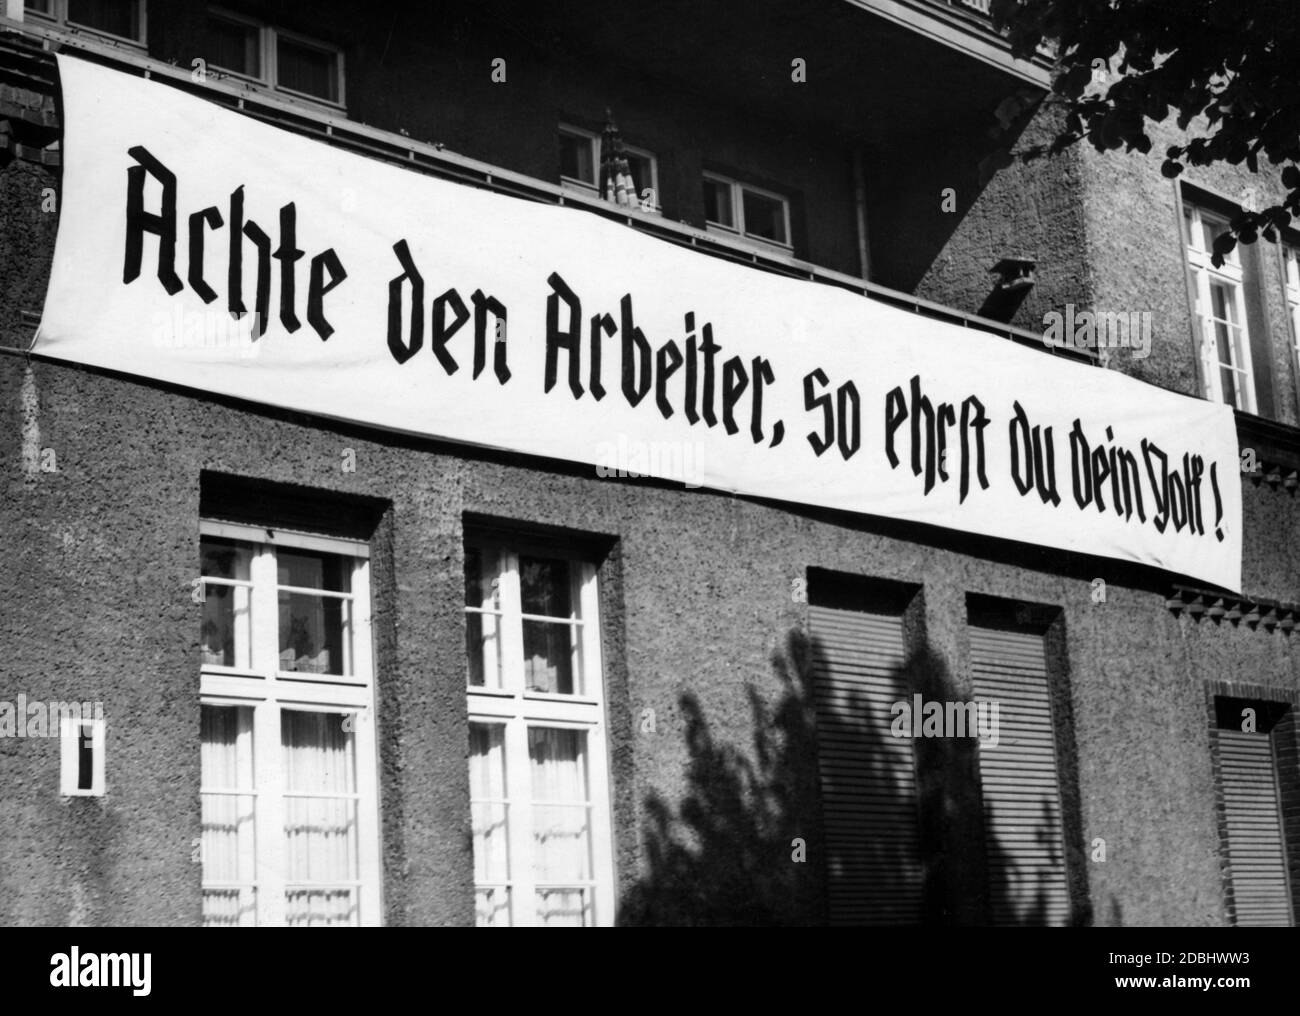 "A banner reading ""Achten den Arbeiter, so ehrst du dein Volk!"" (""Respect the worker, and honour your people!"") on the wall of a house near Tempelhofer Feld in Berlin." Stock Photo